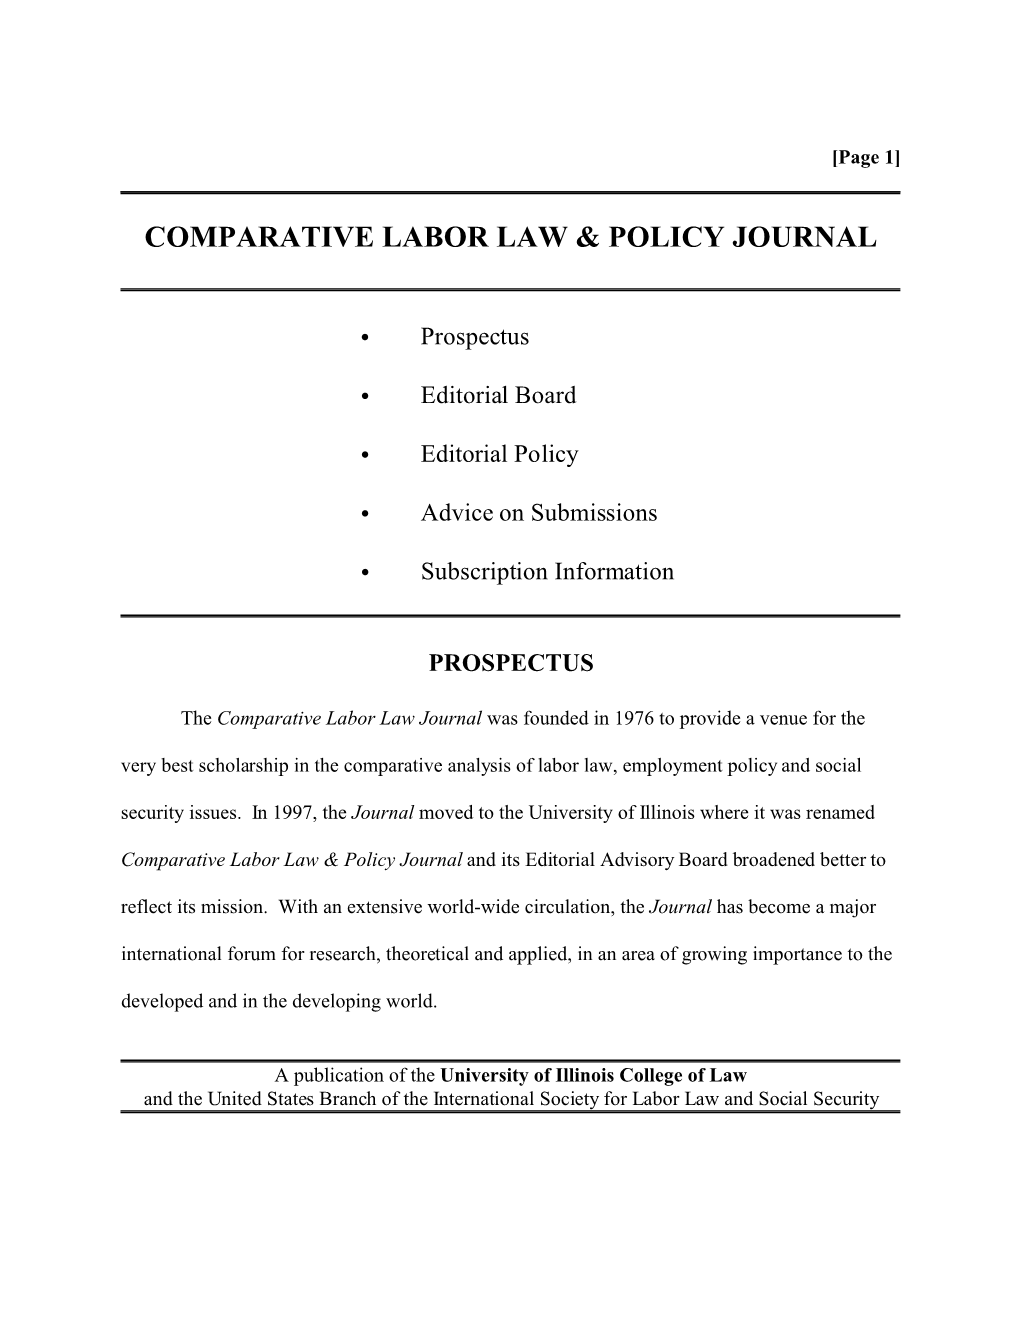 Comparative Labor Law & Policy Journal